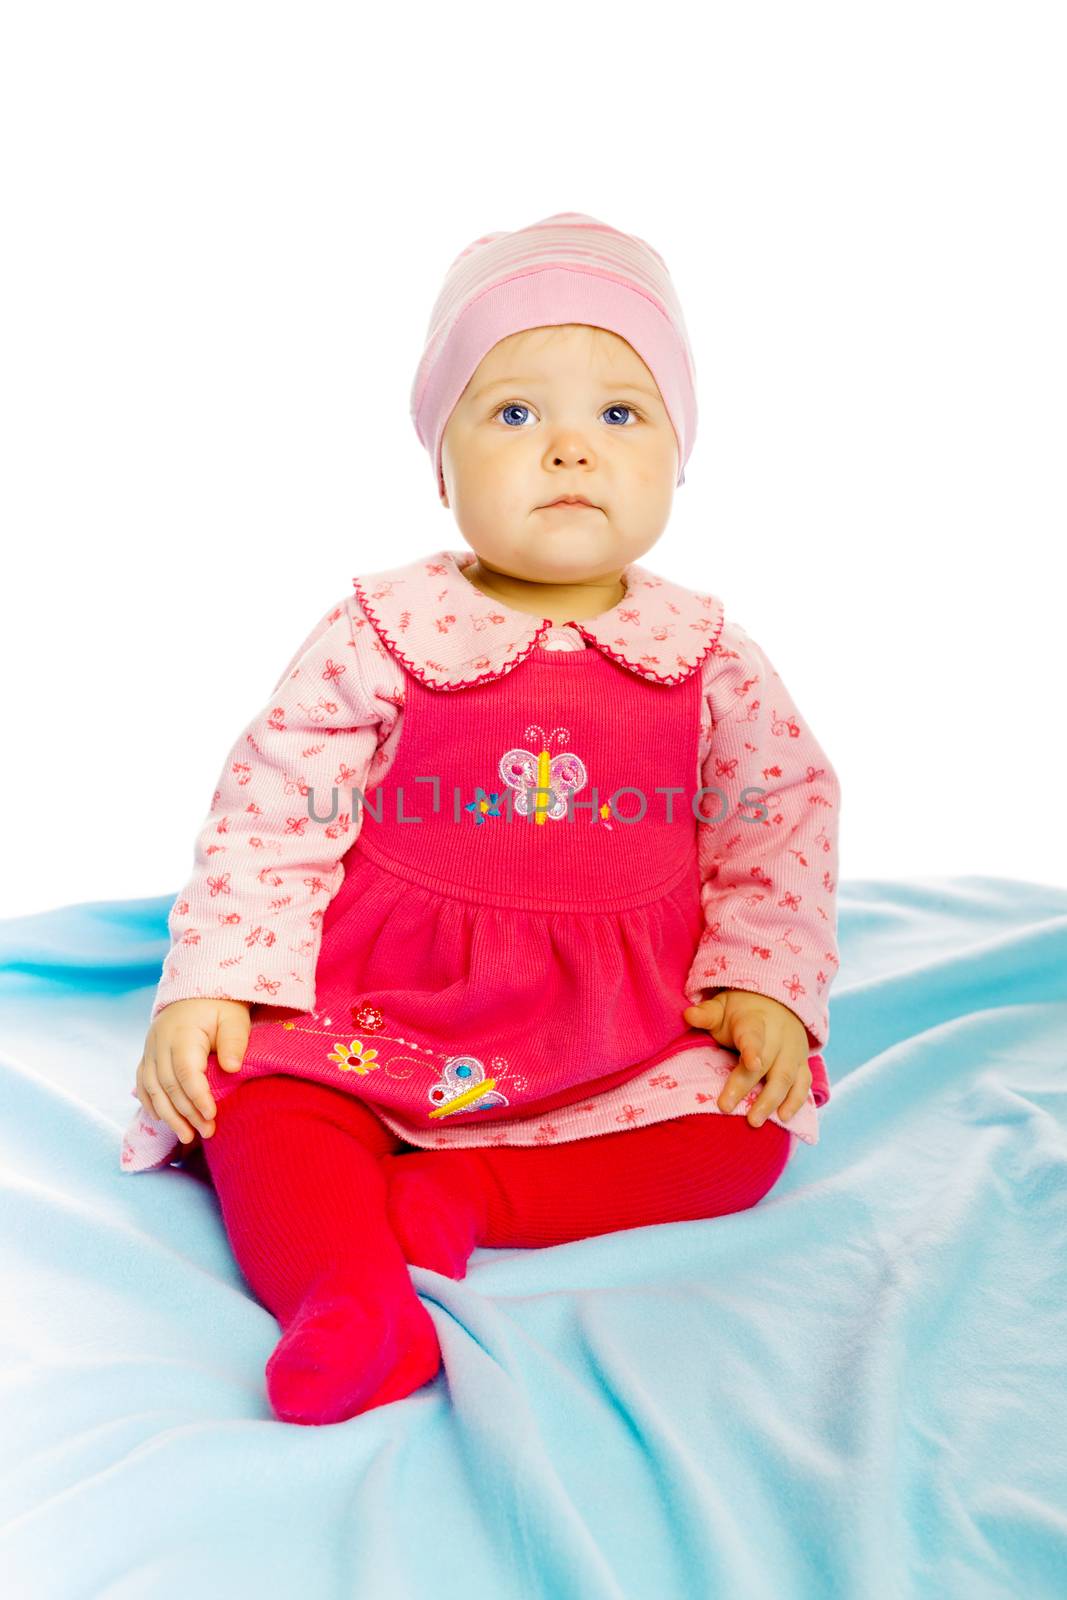 Little girl baby in a dress sitting on the floor